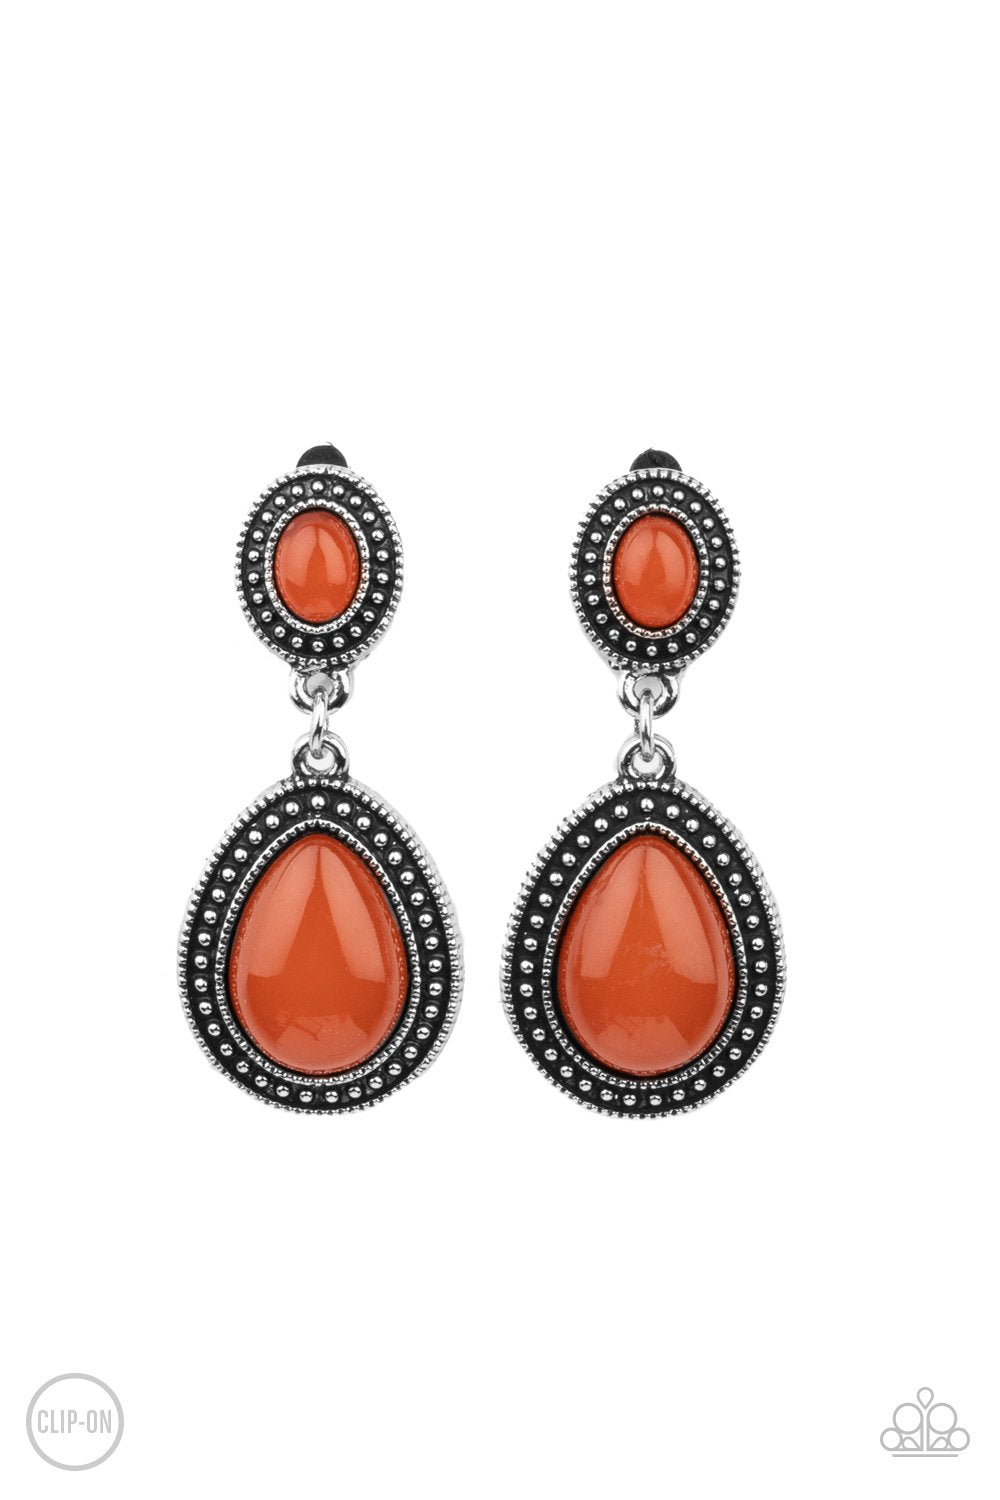 Carefree Clairvoyance Orange Opal Clip-On Earrings - Paparazzi Accessories- lightbox - CarasShop.com - $5 Jewelry by Cara Jewels